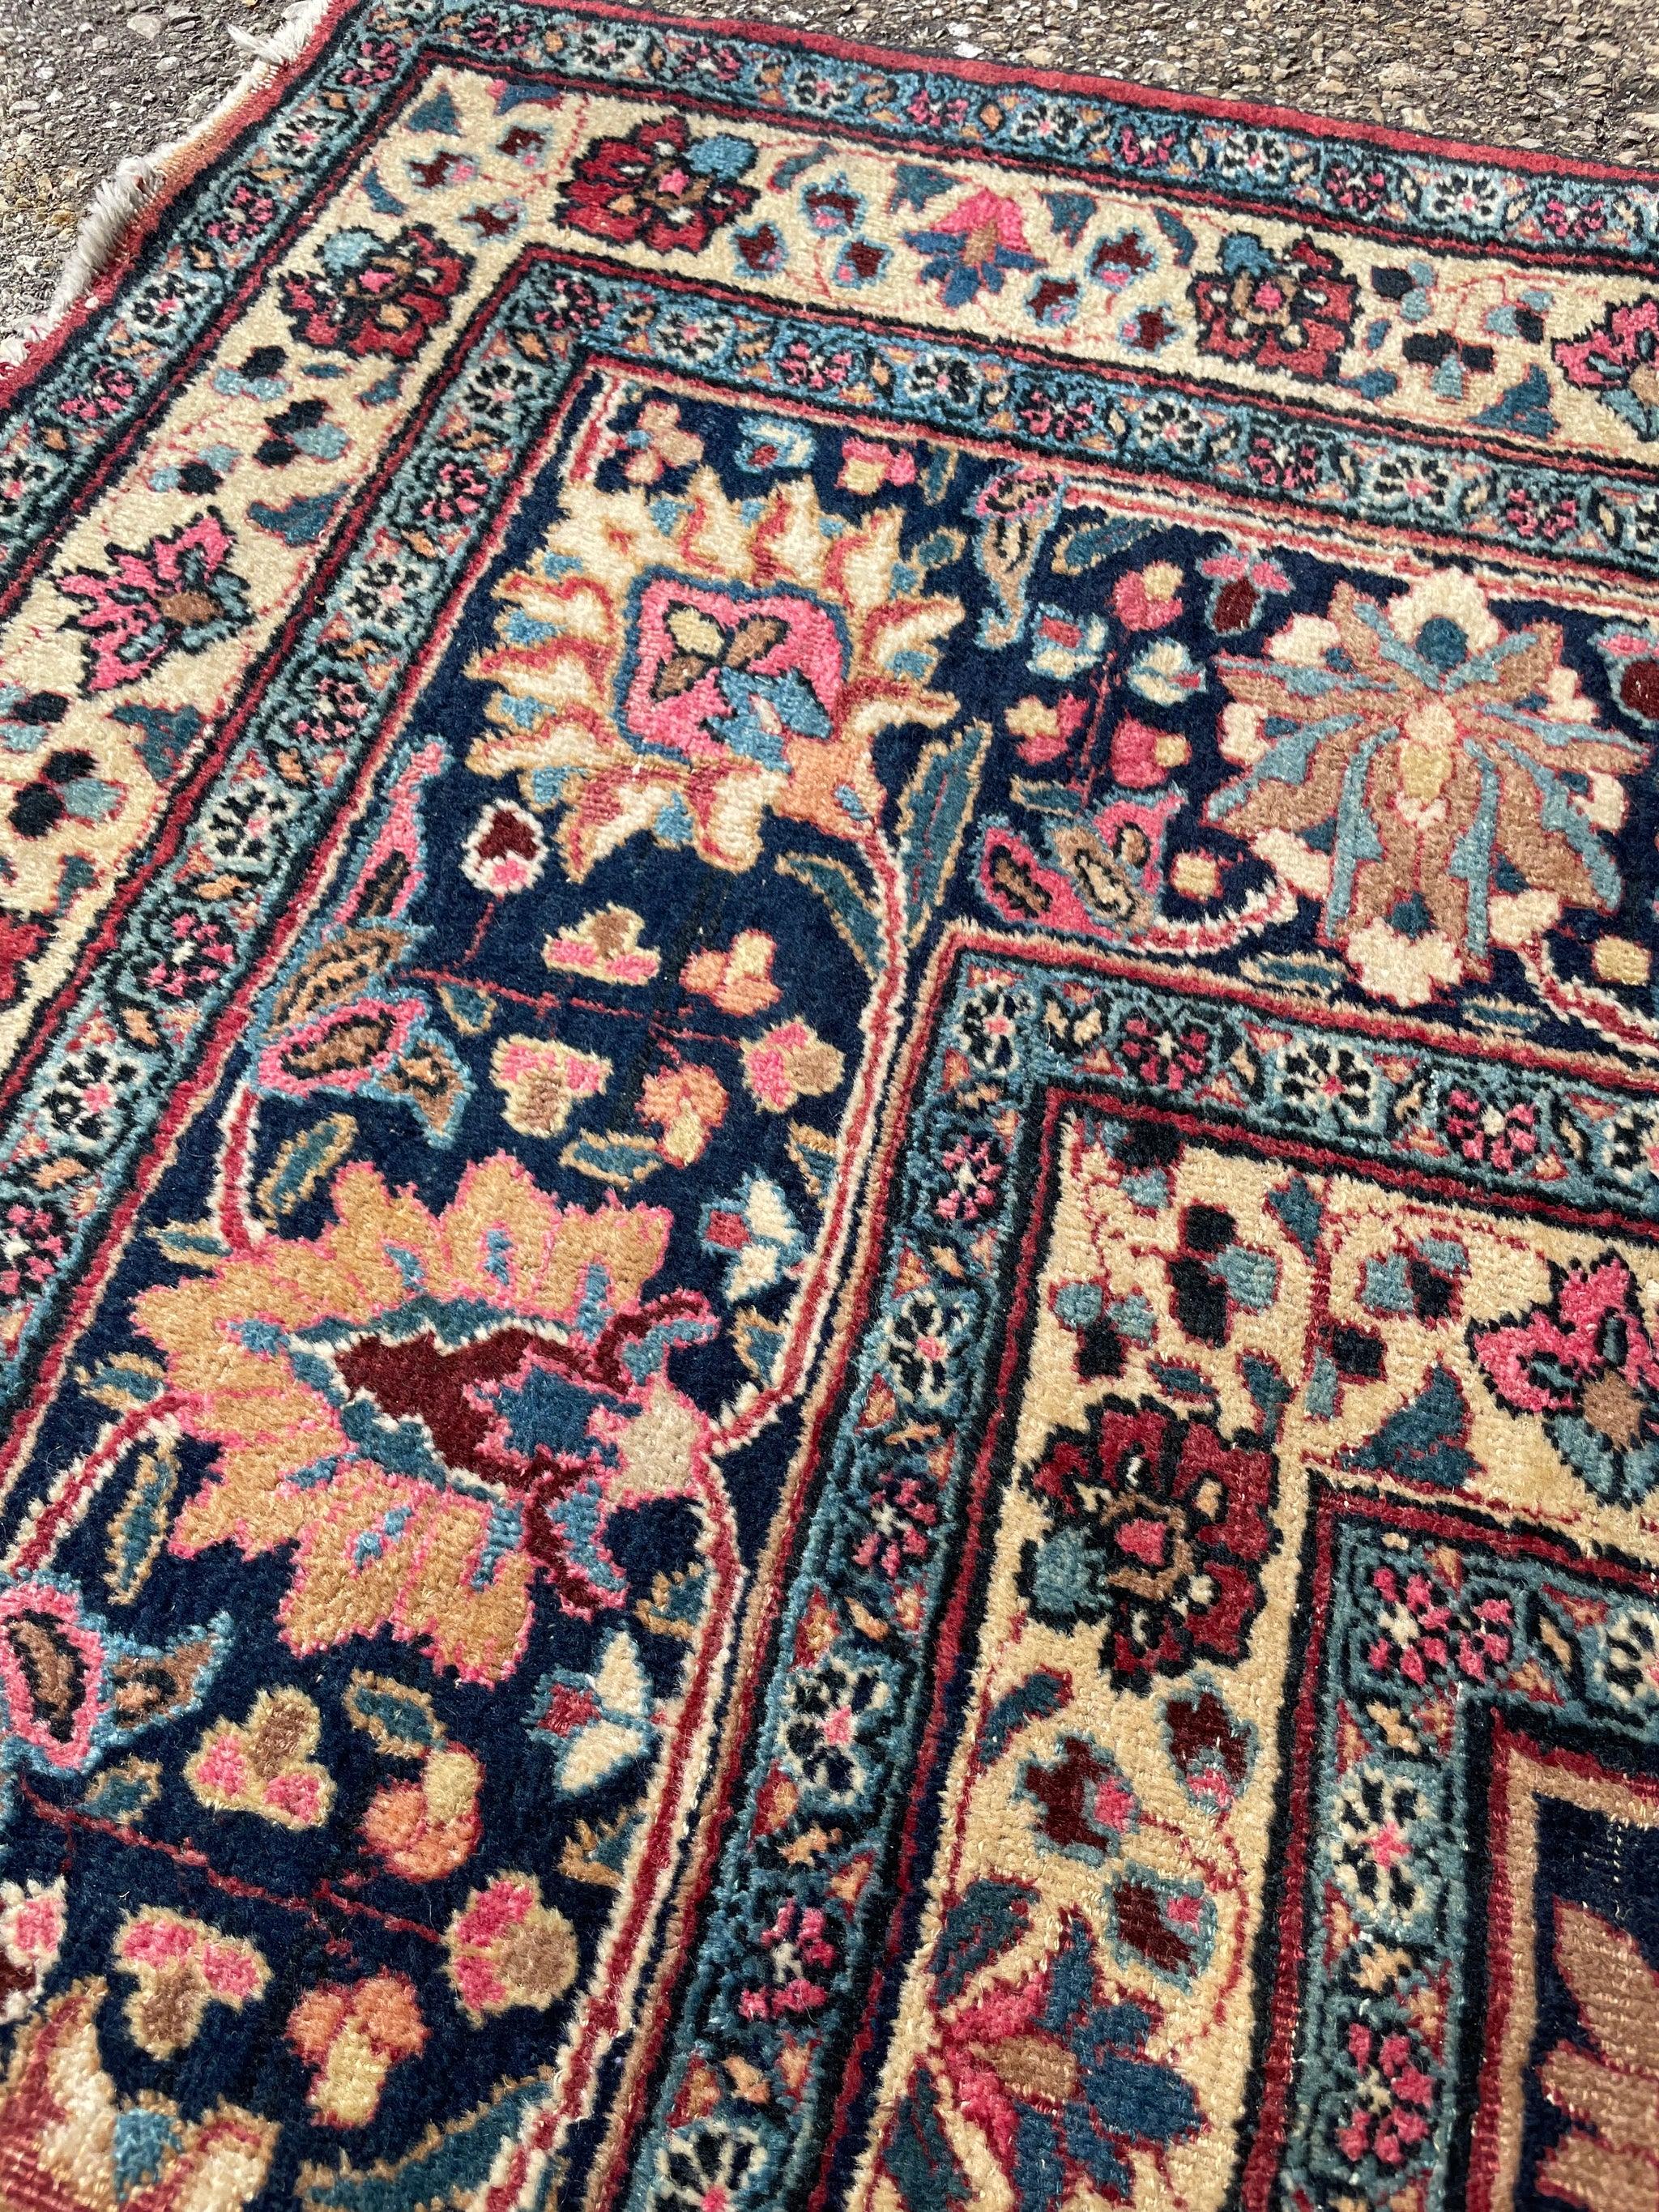 Glowing Timeless Antique with Blooming Jewel Flora

Size: 9.11 x 13.9
Age: Antique, C. 1940's
Pile: Low/Medium with soft and strong plush wool.

This rug is one-of-a-kind, only one in the world, no others are available.

Because of the